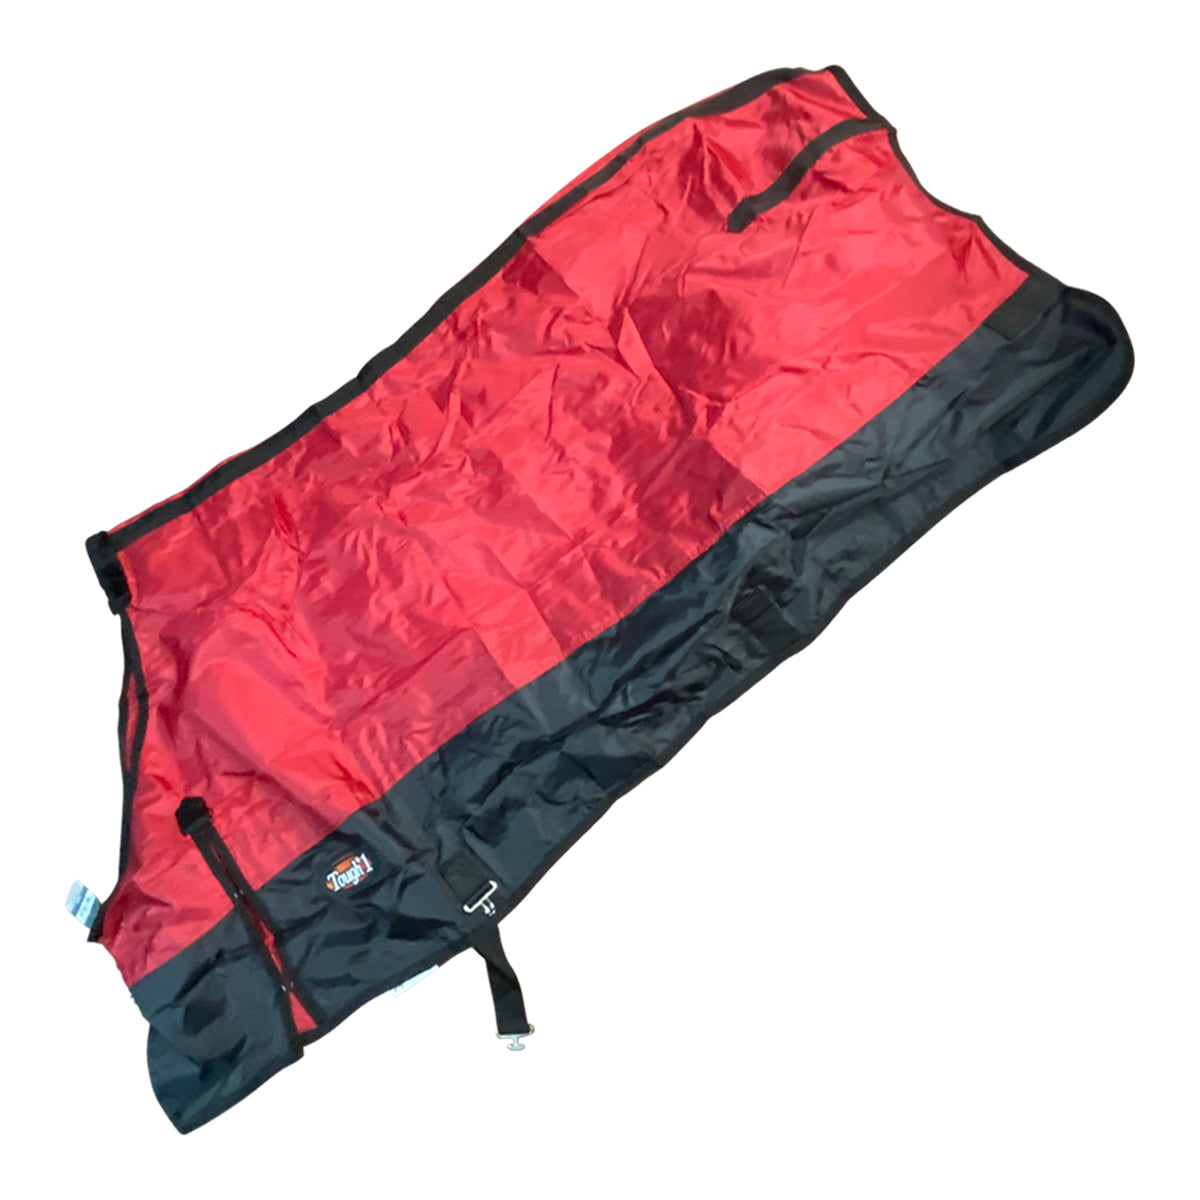 Tough 1 Stable Sheet 420D in Red/Black